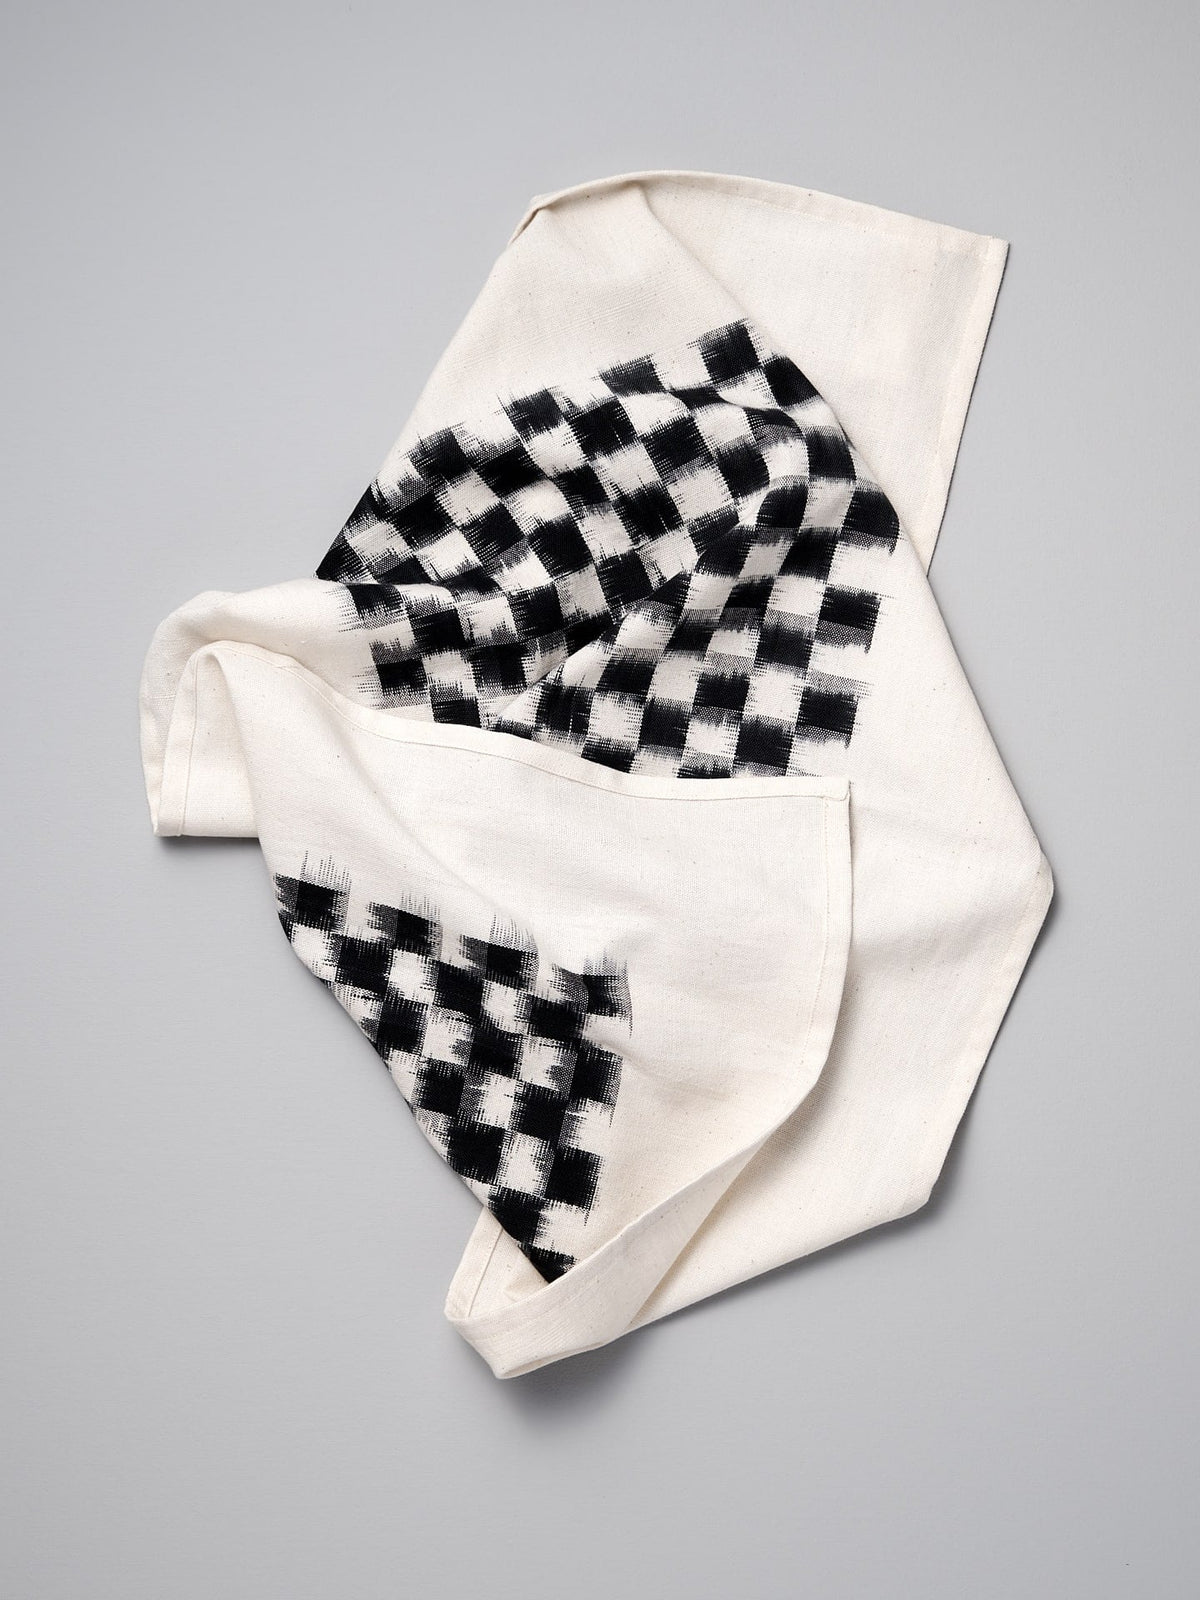 A Ikat Weave Tea-towel – Black Check handkerchief on a white surface from Stitchwallah.